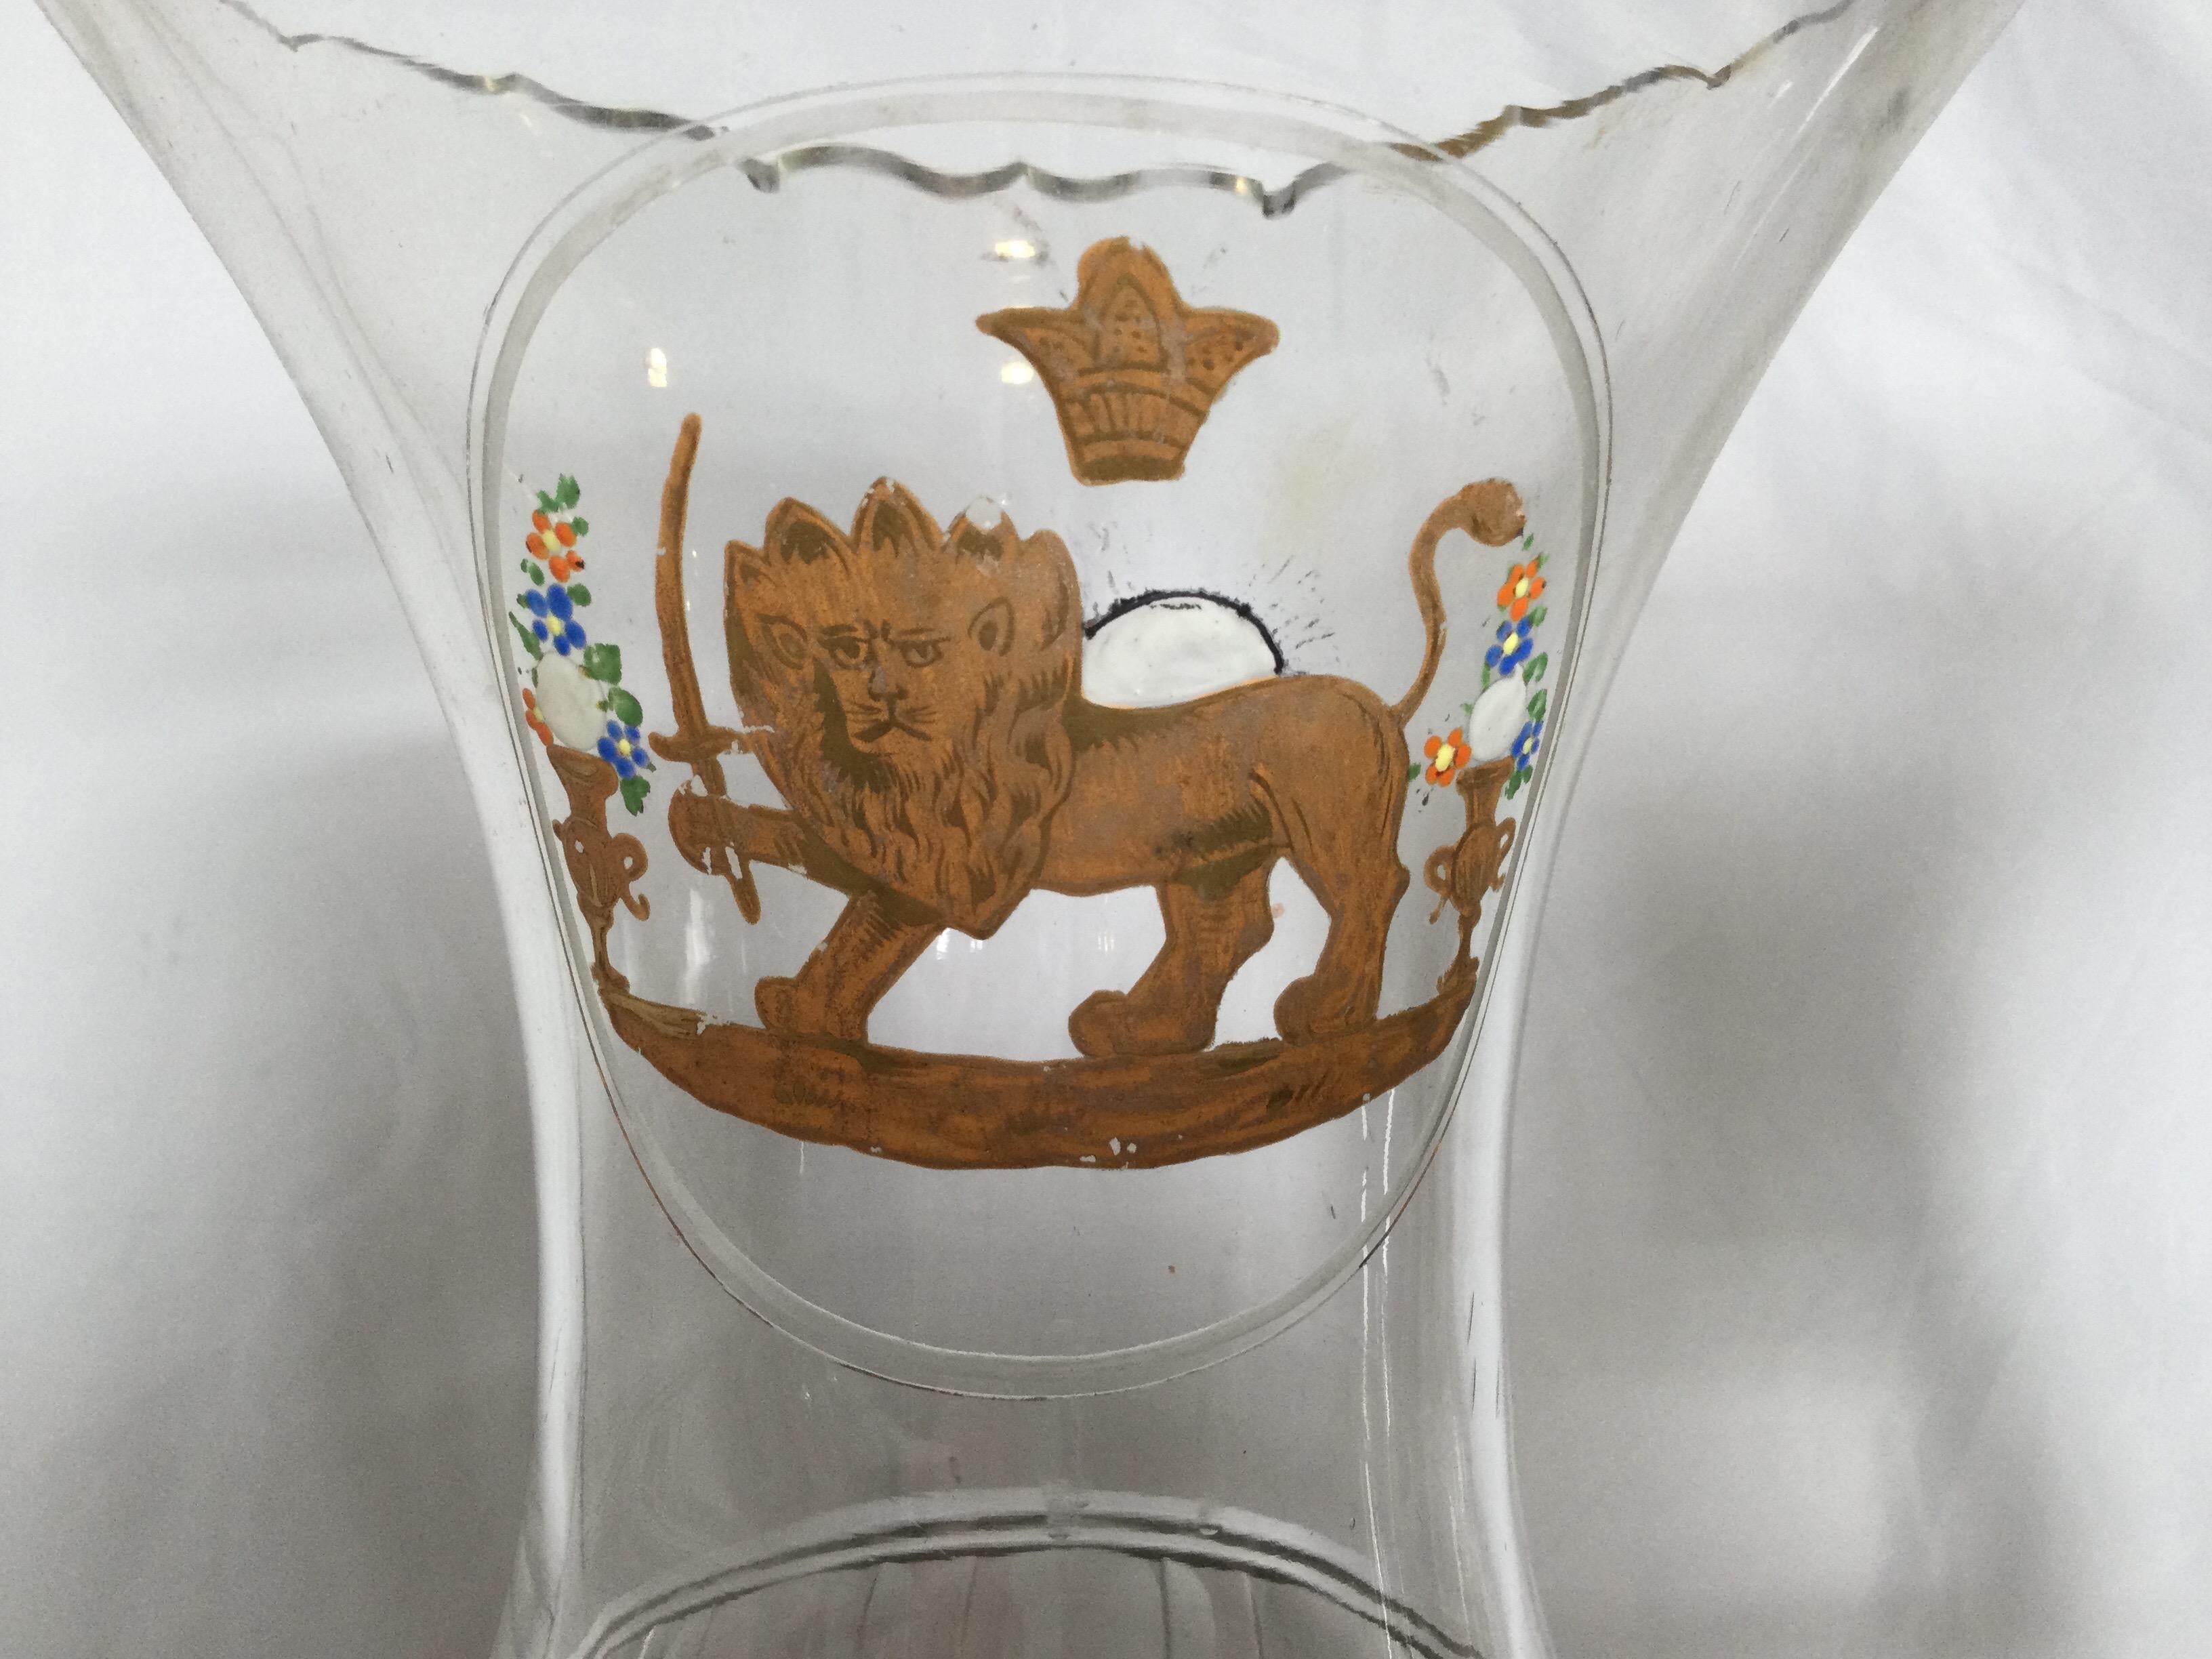 Pair of Cut Glass Hurricane Candlesticks with Lion Decoration 2